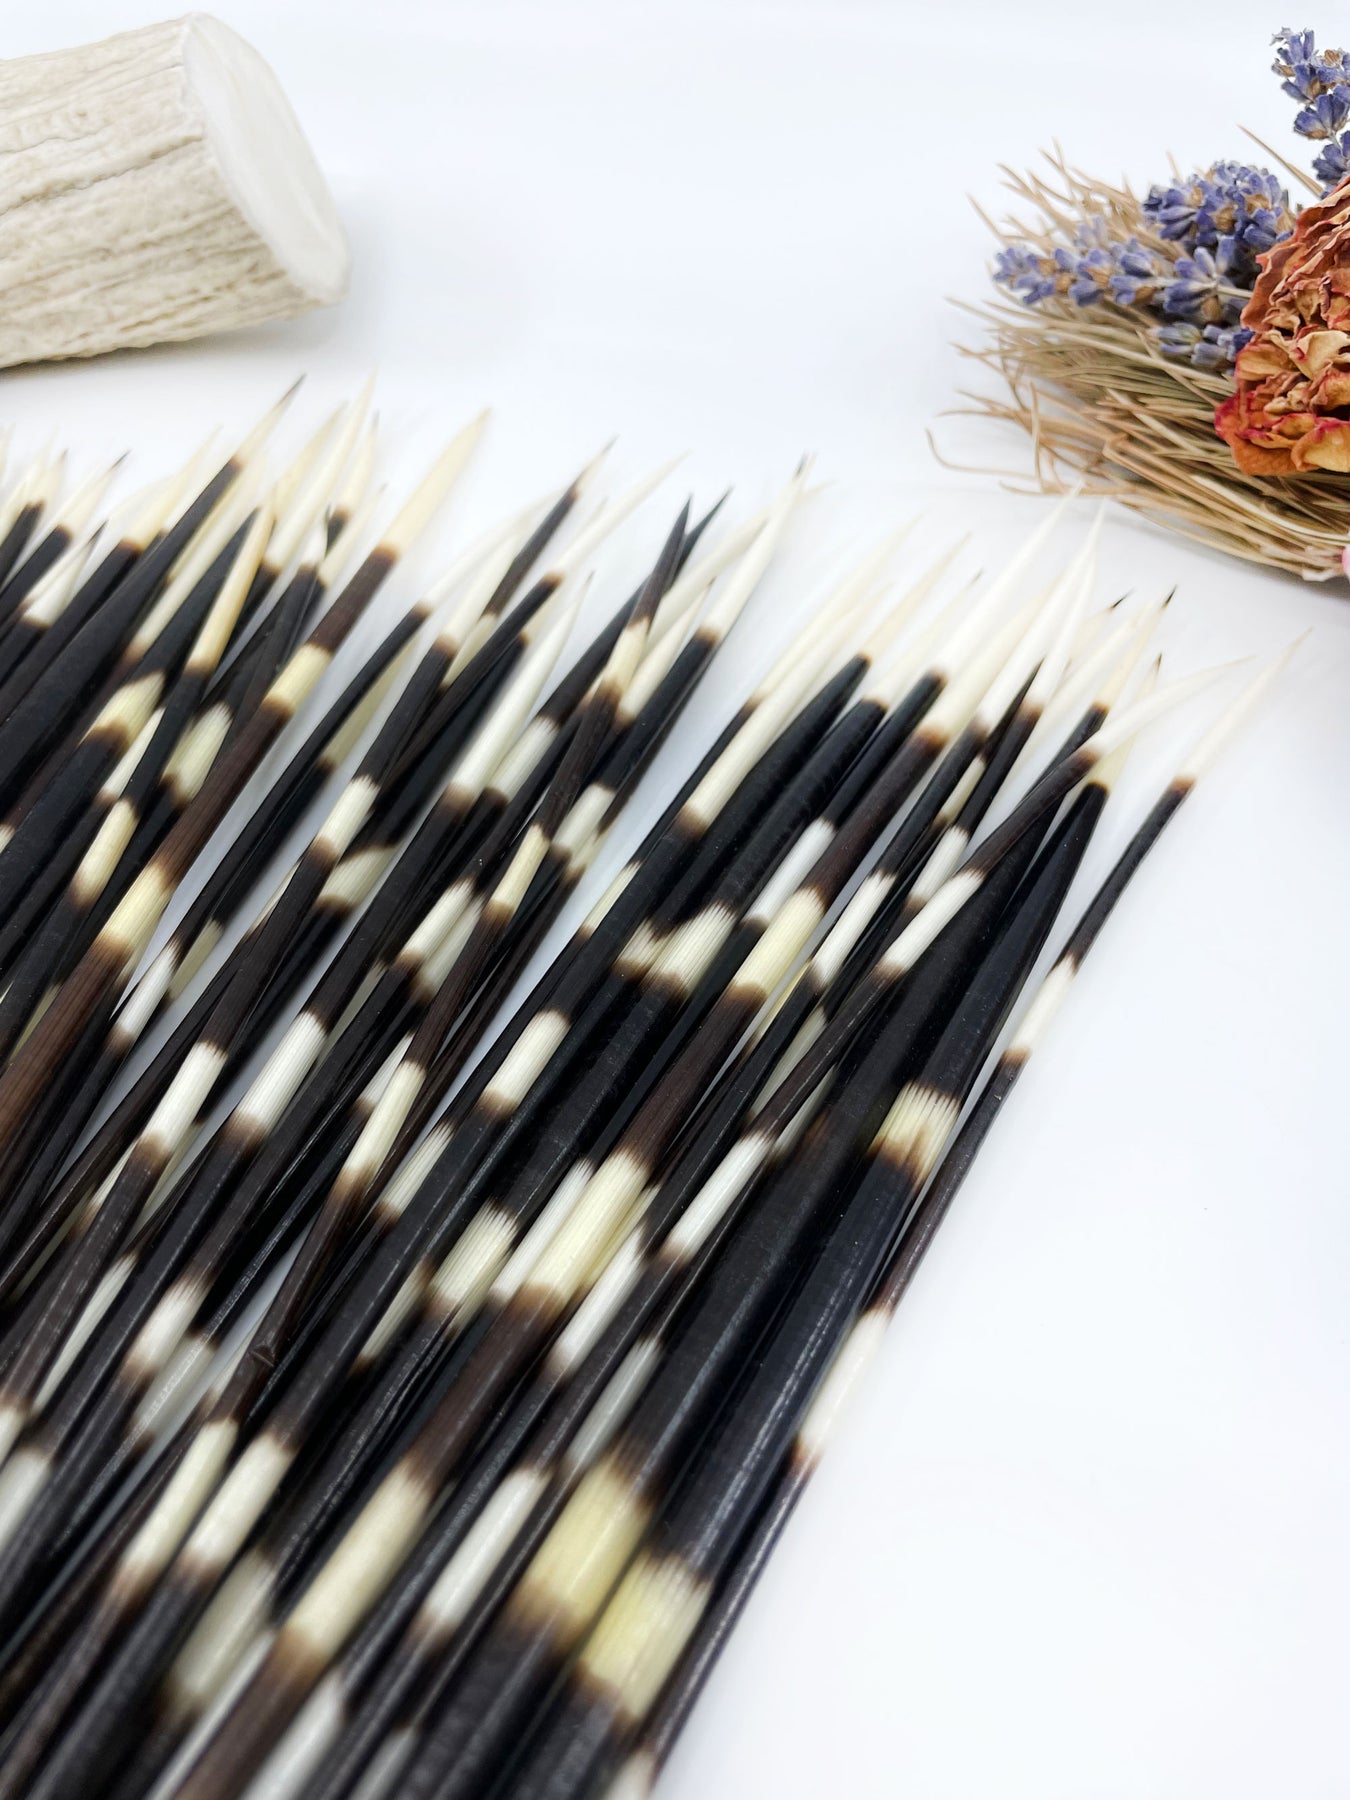 Authentic African Porcupine Quills, Medium 5-7 Long, 5 Pcs / Needles for  Quillwork, Craft, and Jewelry Making 